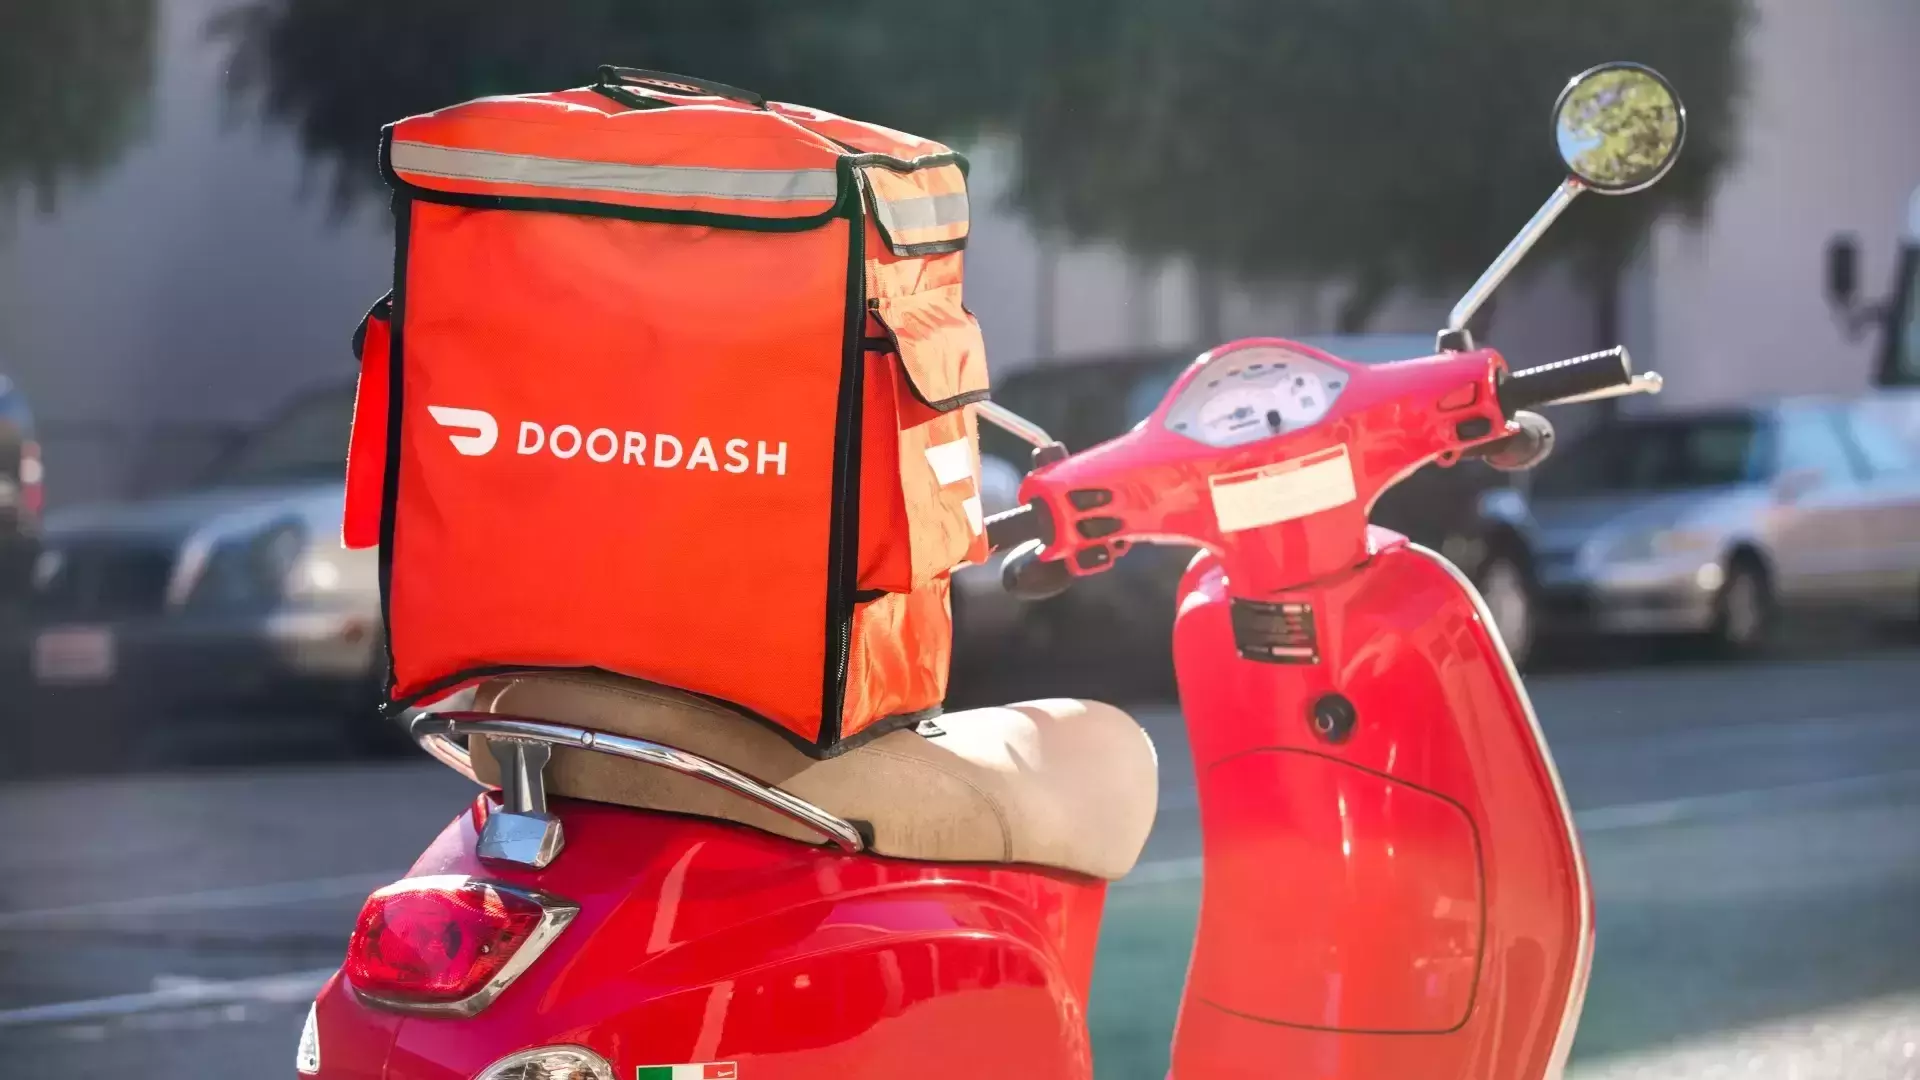 DoorDash to lay off 1,250 workers to reign in costs